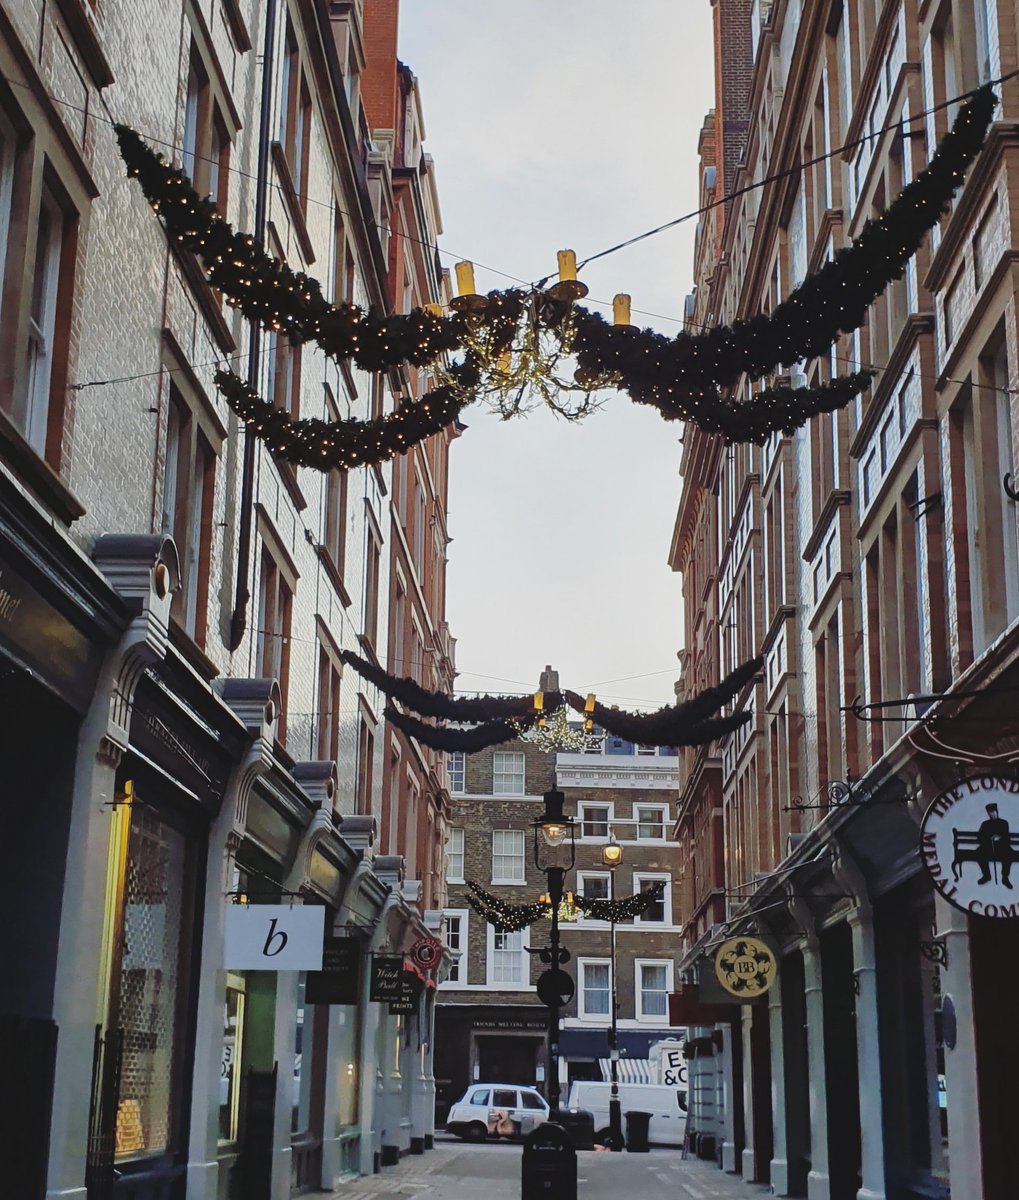 And just like that the Christmas lights are up & the temperature plummets... 

Come visit us on Cecil Court!

#cecilcourt #signedfirsteditions #firsteditions #modernfiction #collectibles #goldsborobooks